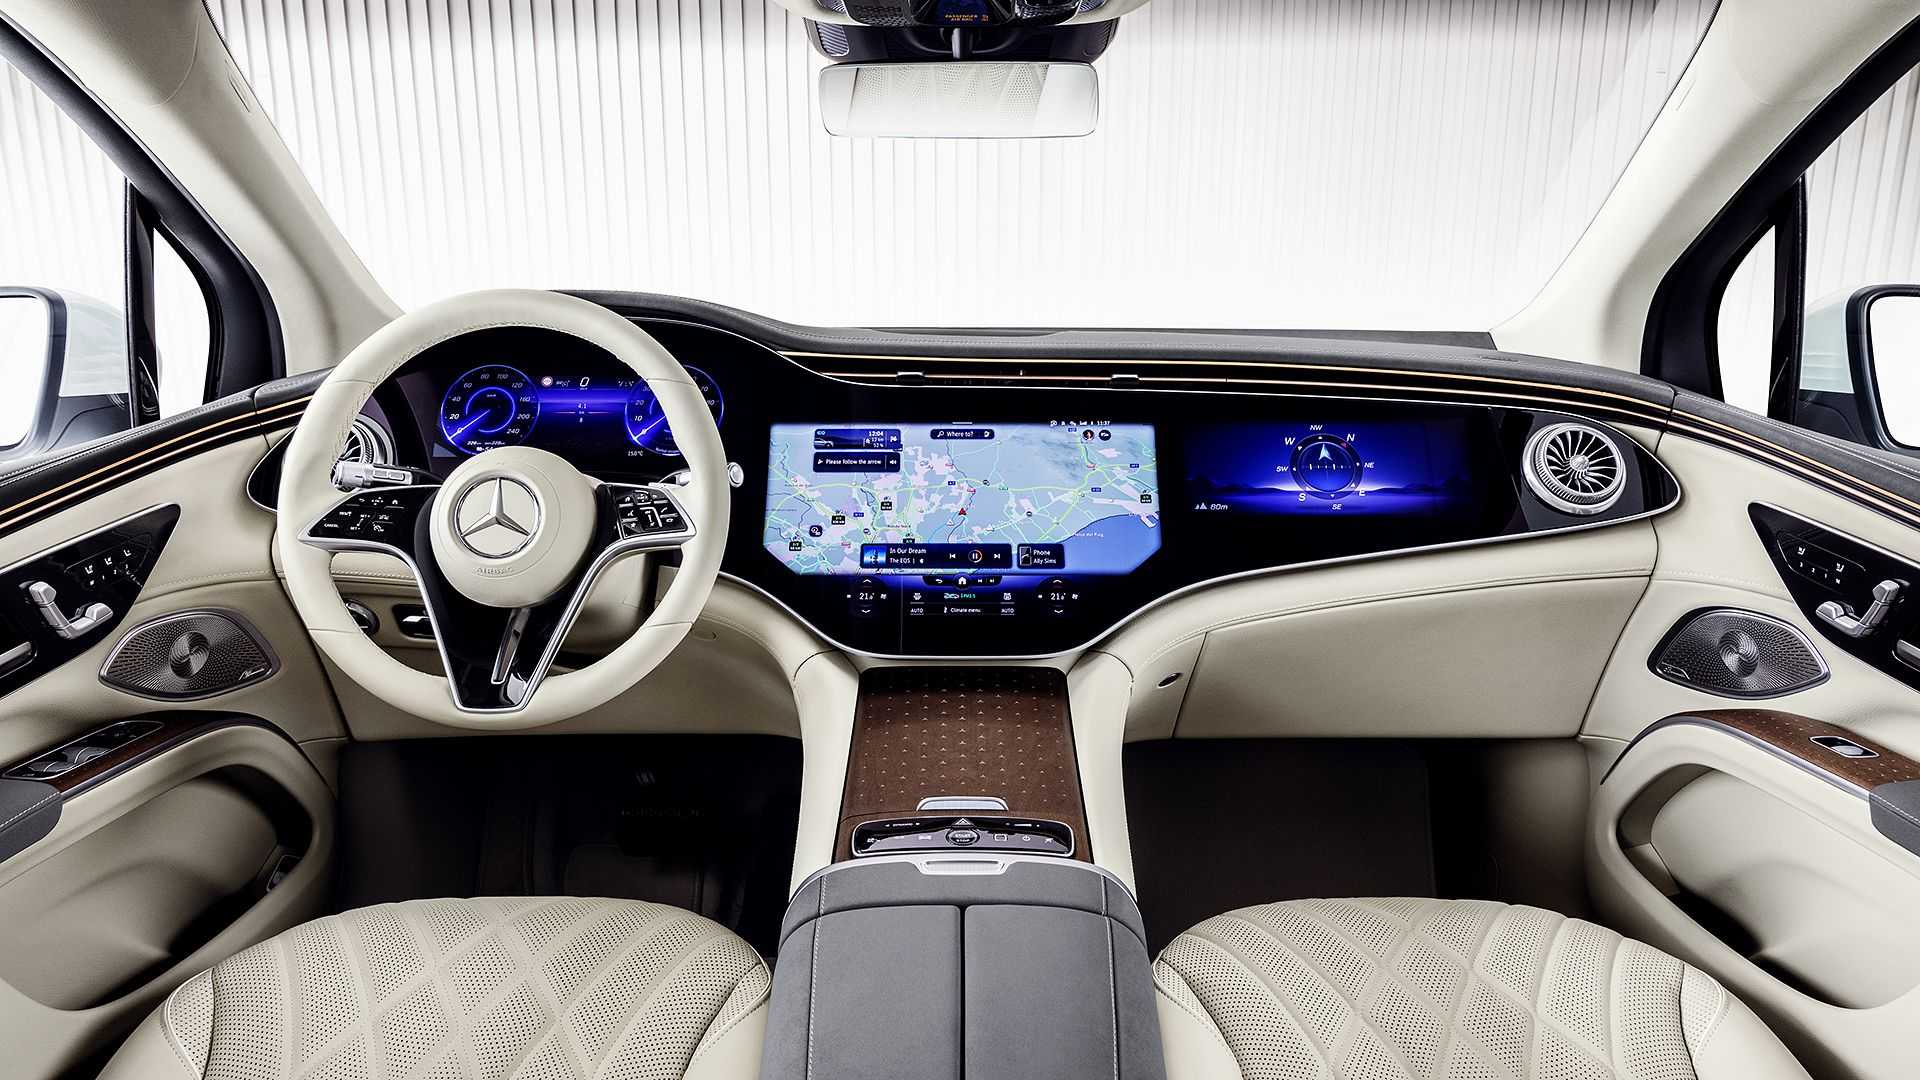 mercedes wants to put even more screens inside its cars